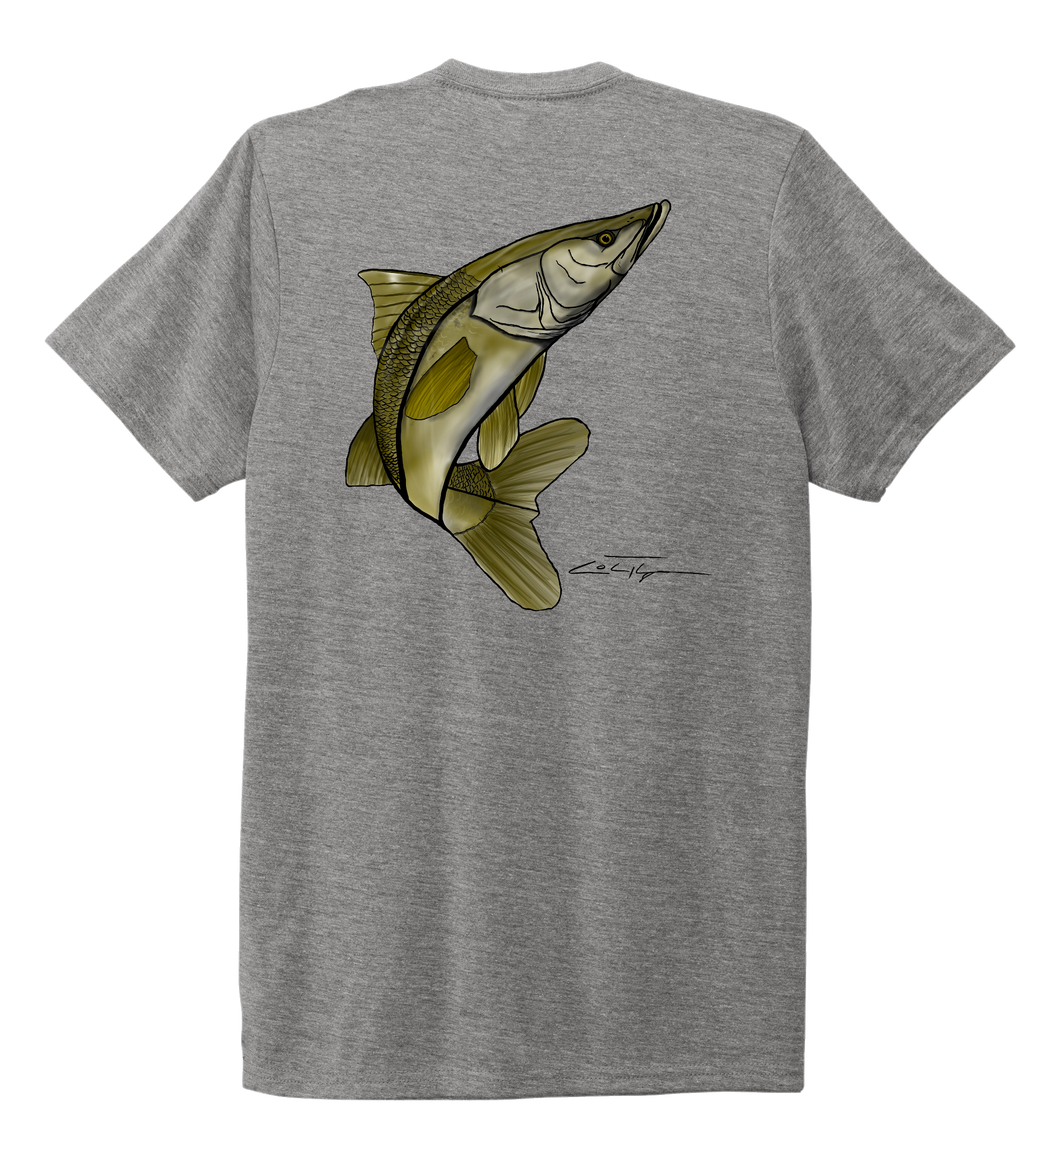 Colin Thompson, Snook, Crew Neck T-Shirt in Oyster Grey